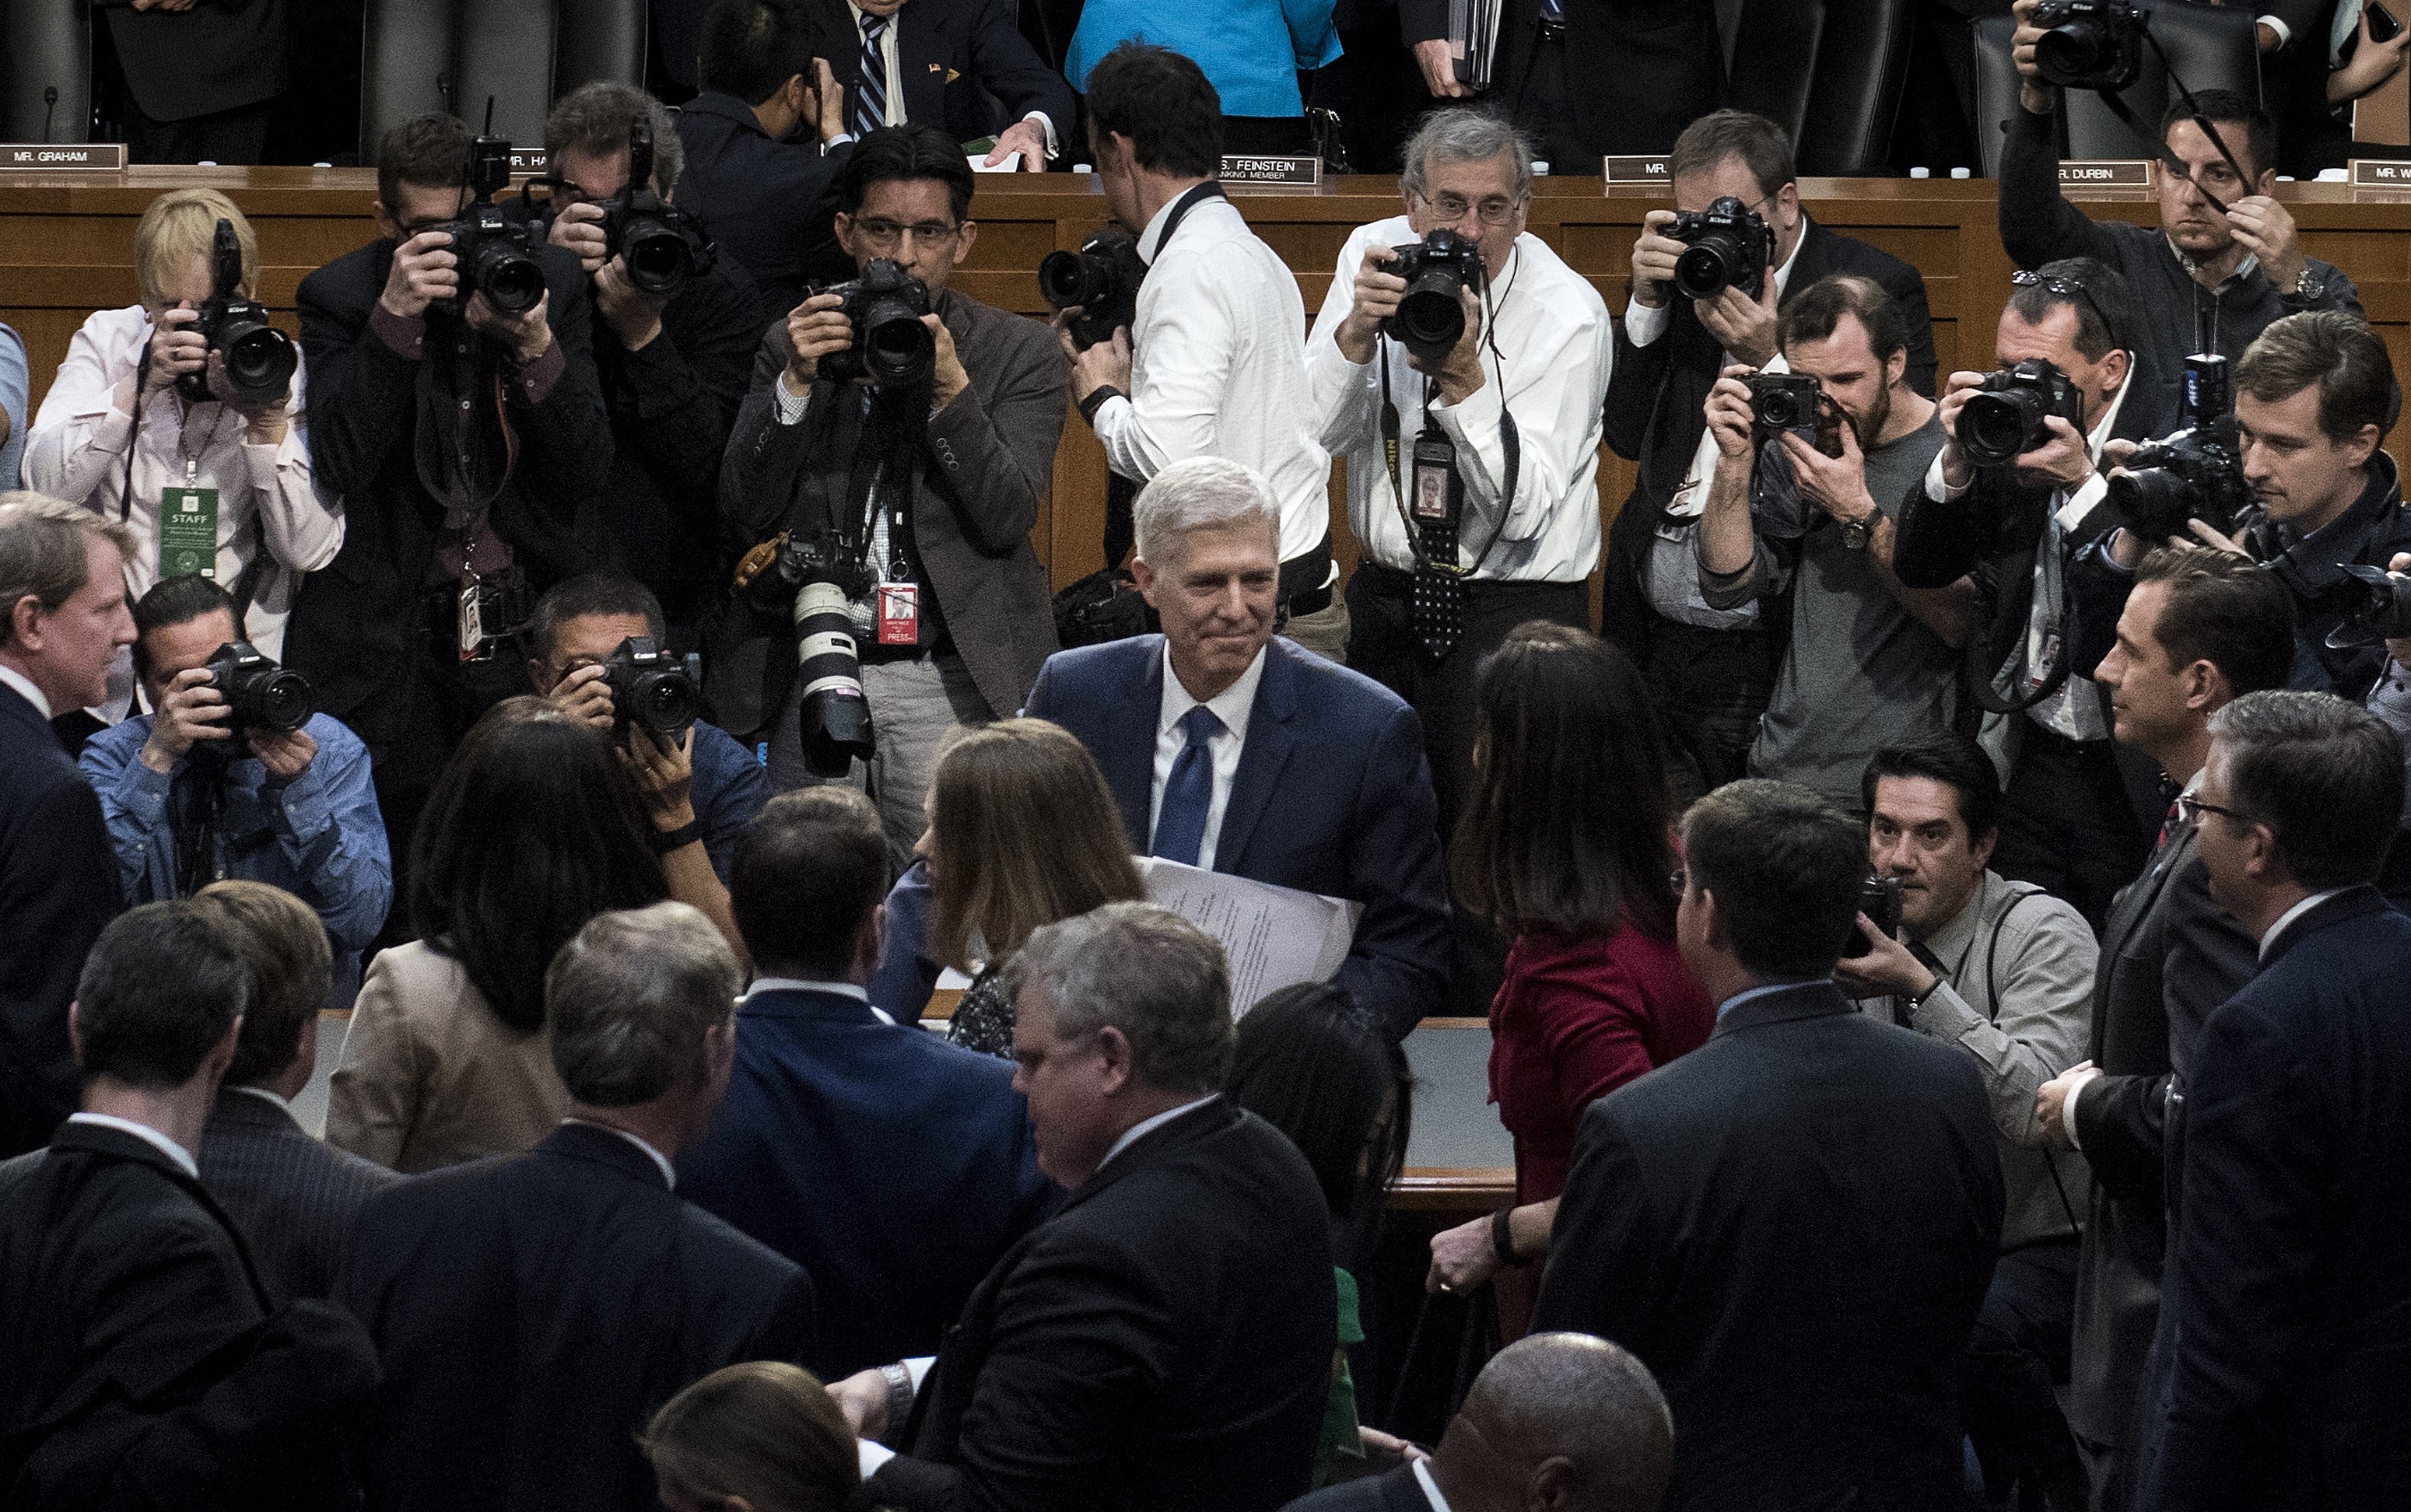 Neil Gorsuch's confirmation hearings: 5 key things to watch for this week